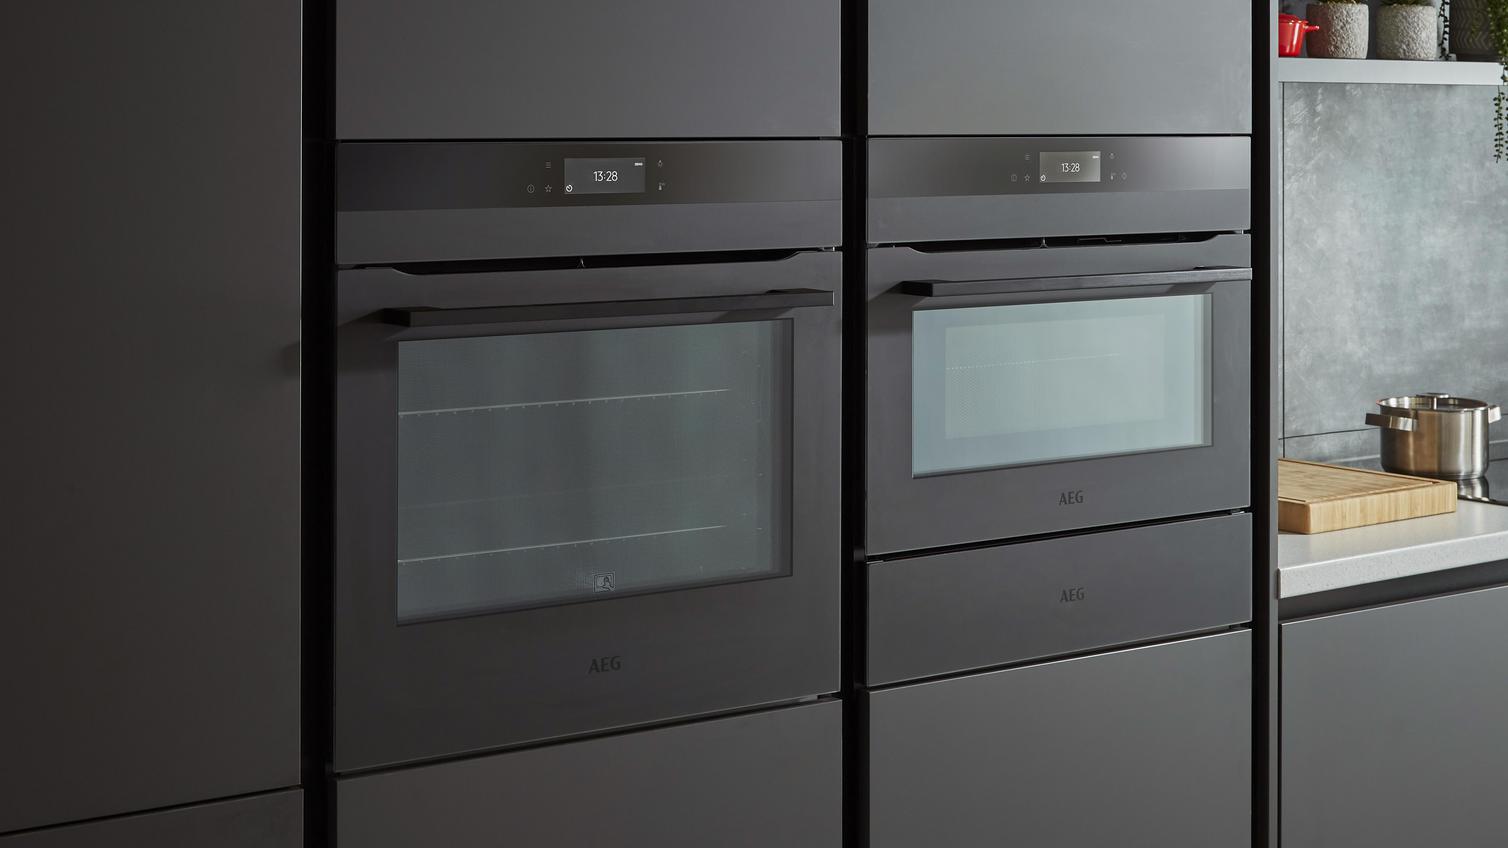 AEG Steam Crisp Single Oven, Compact Oven With Microwave and Two Warming Drawers Closed